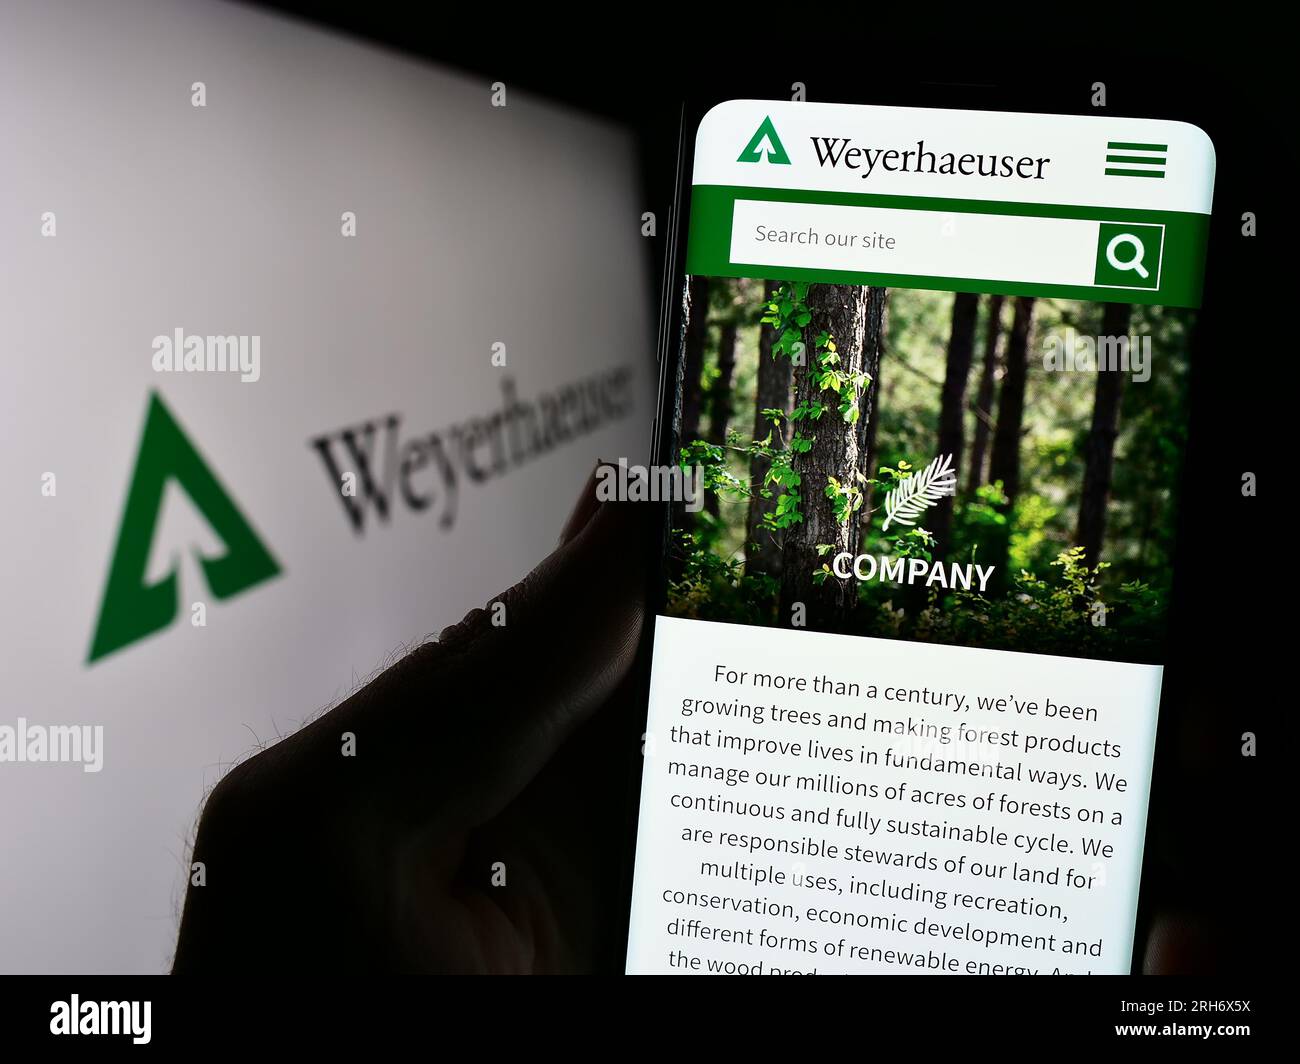 Person holding smartphone with webpage of US timberland business Weyerhaeuser Company on screen with logo. Focus on center of phone display. Stock Photo